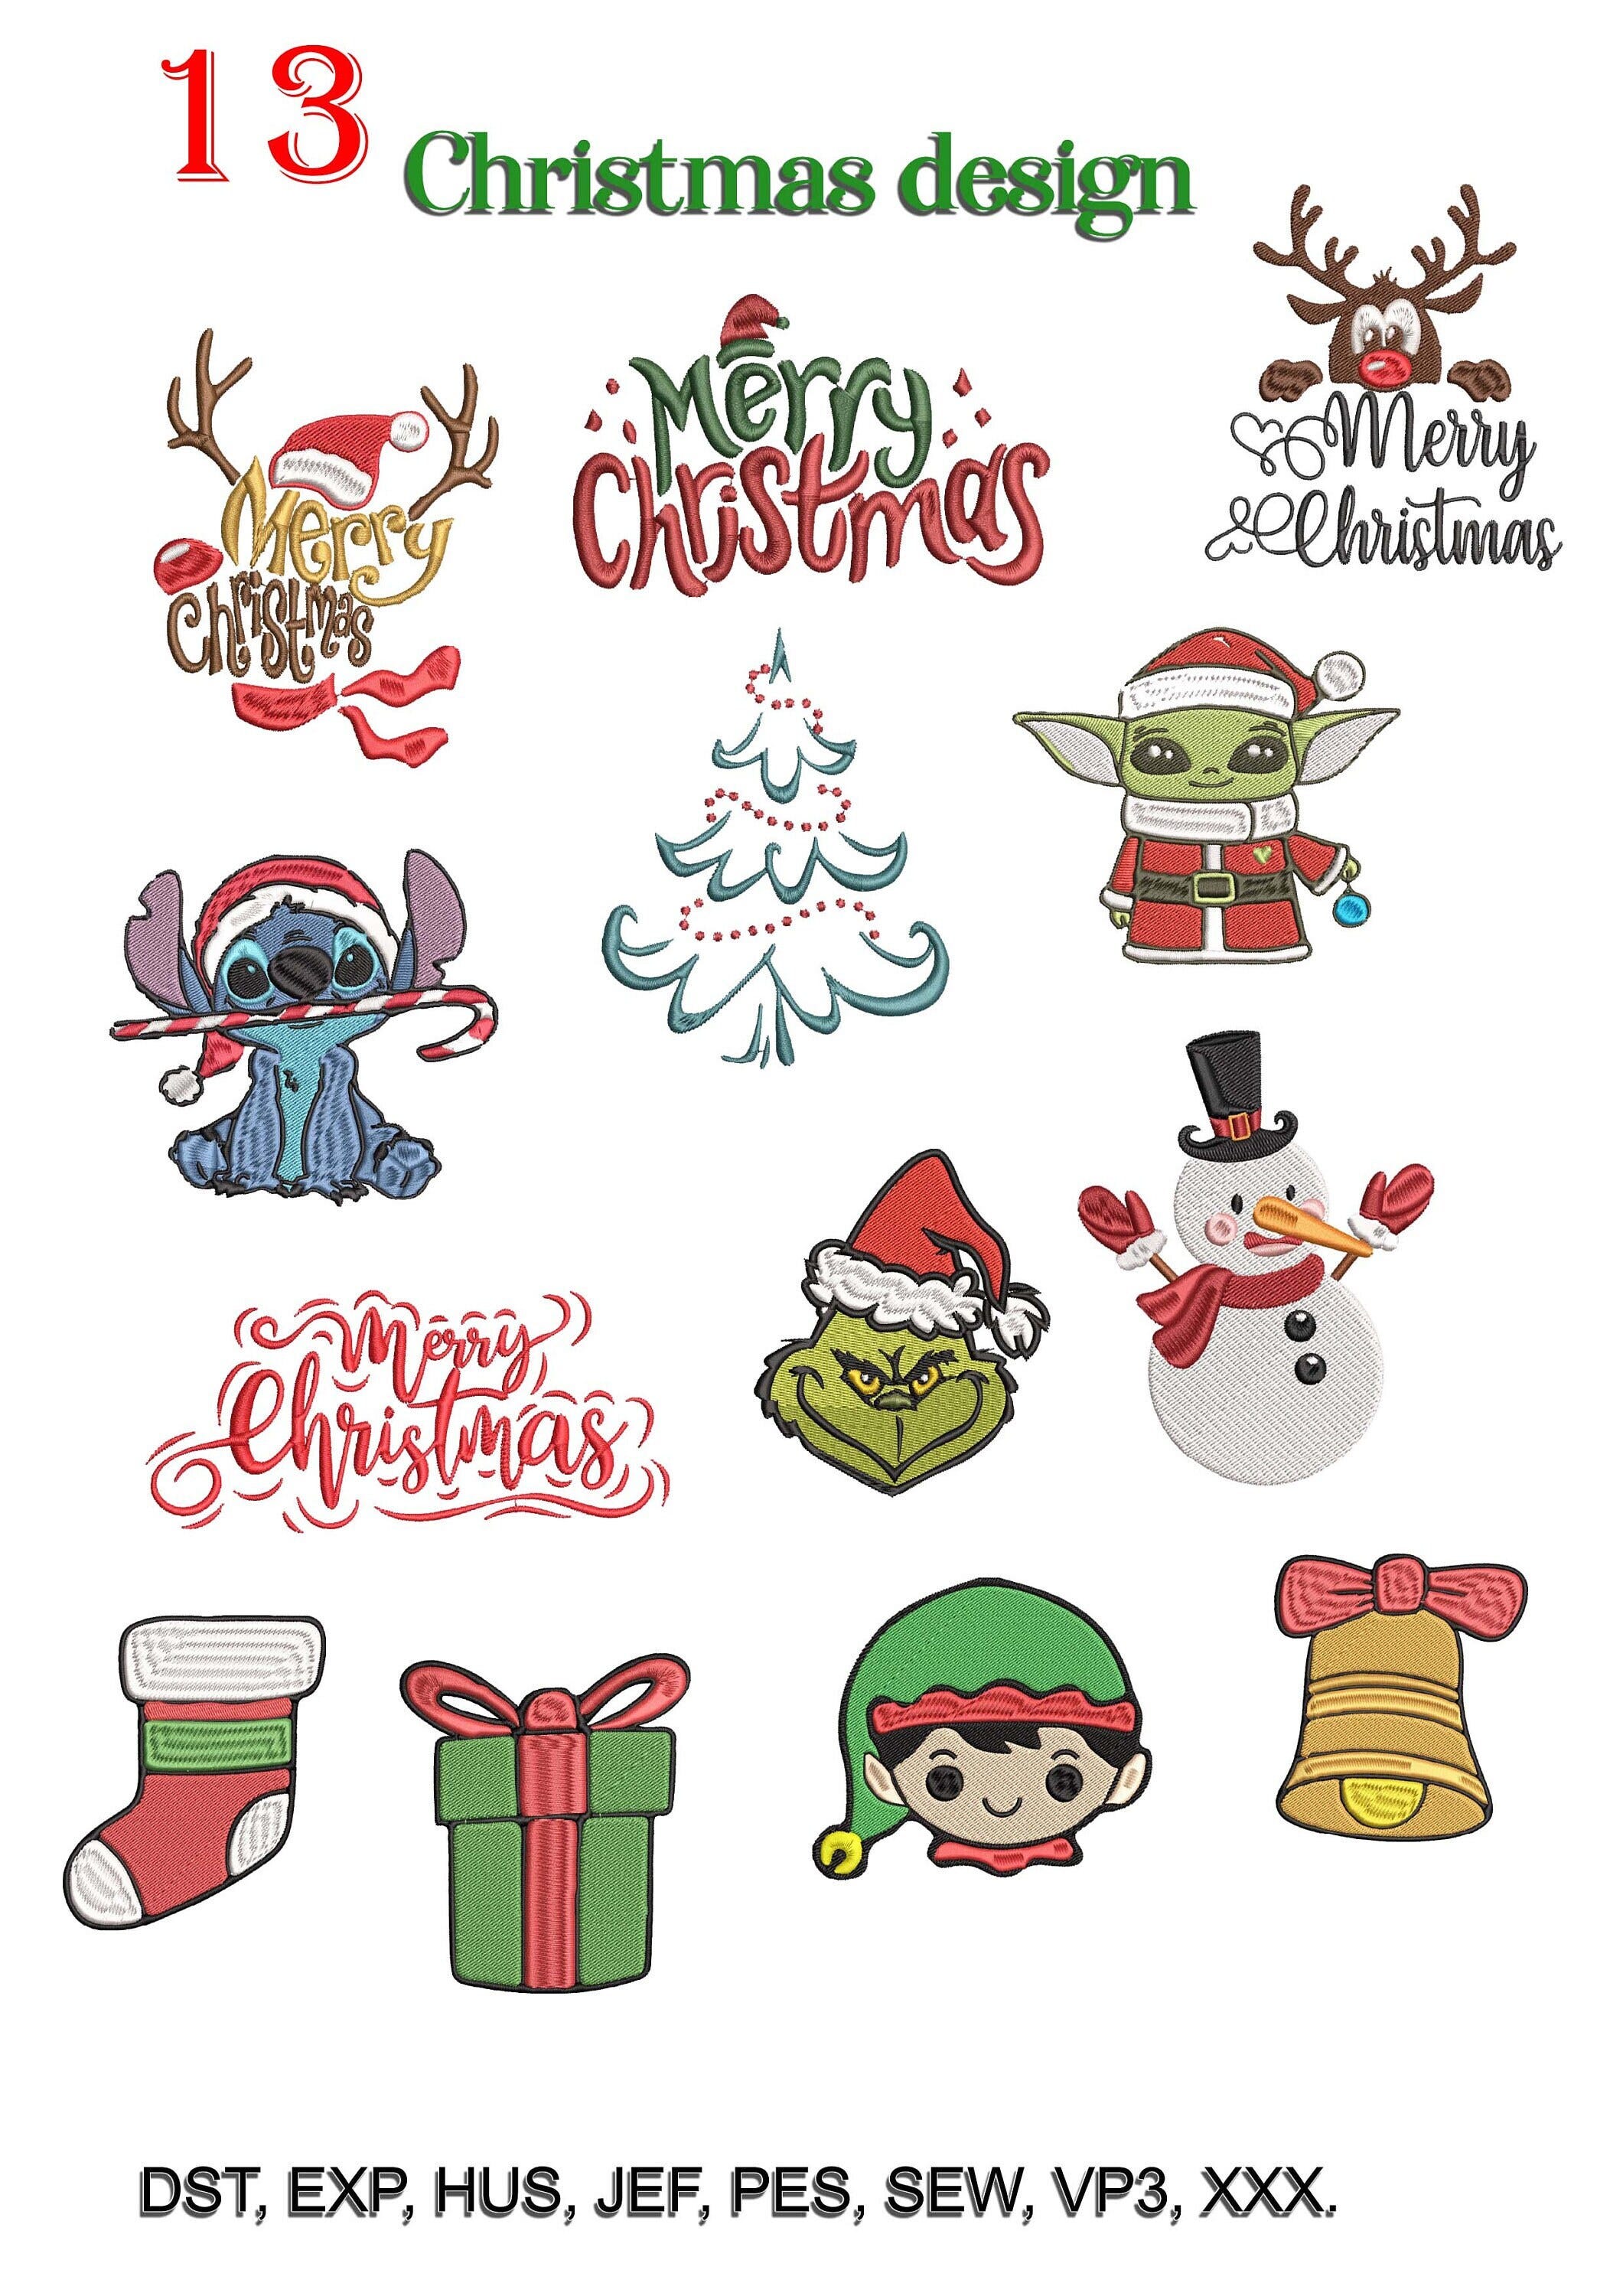 23 cute Christmas theme character Digital Embroidery design file, cartoon embroidery, direct download